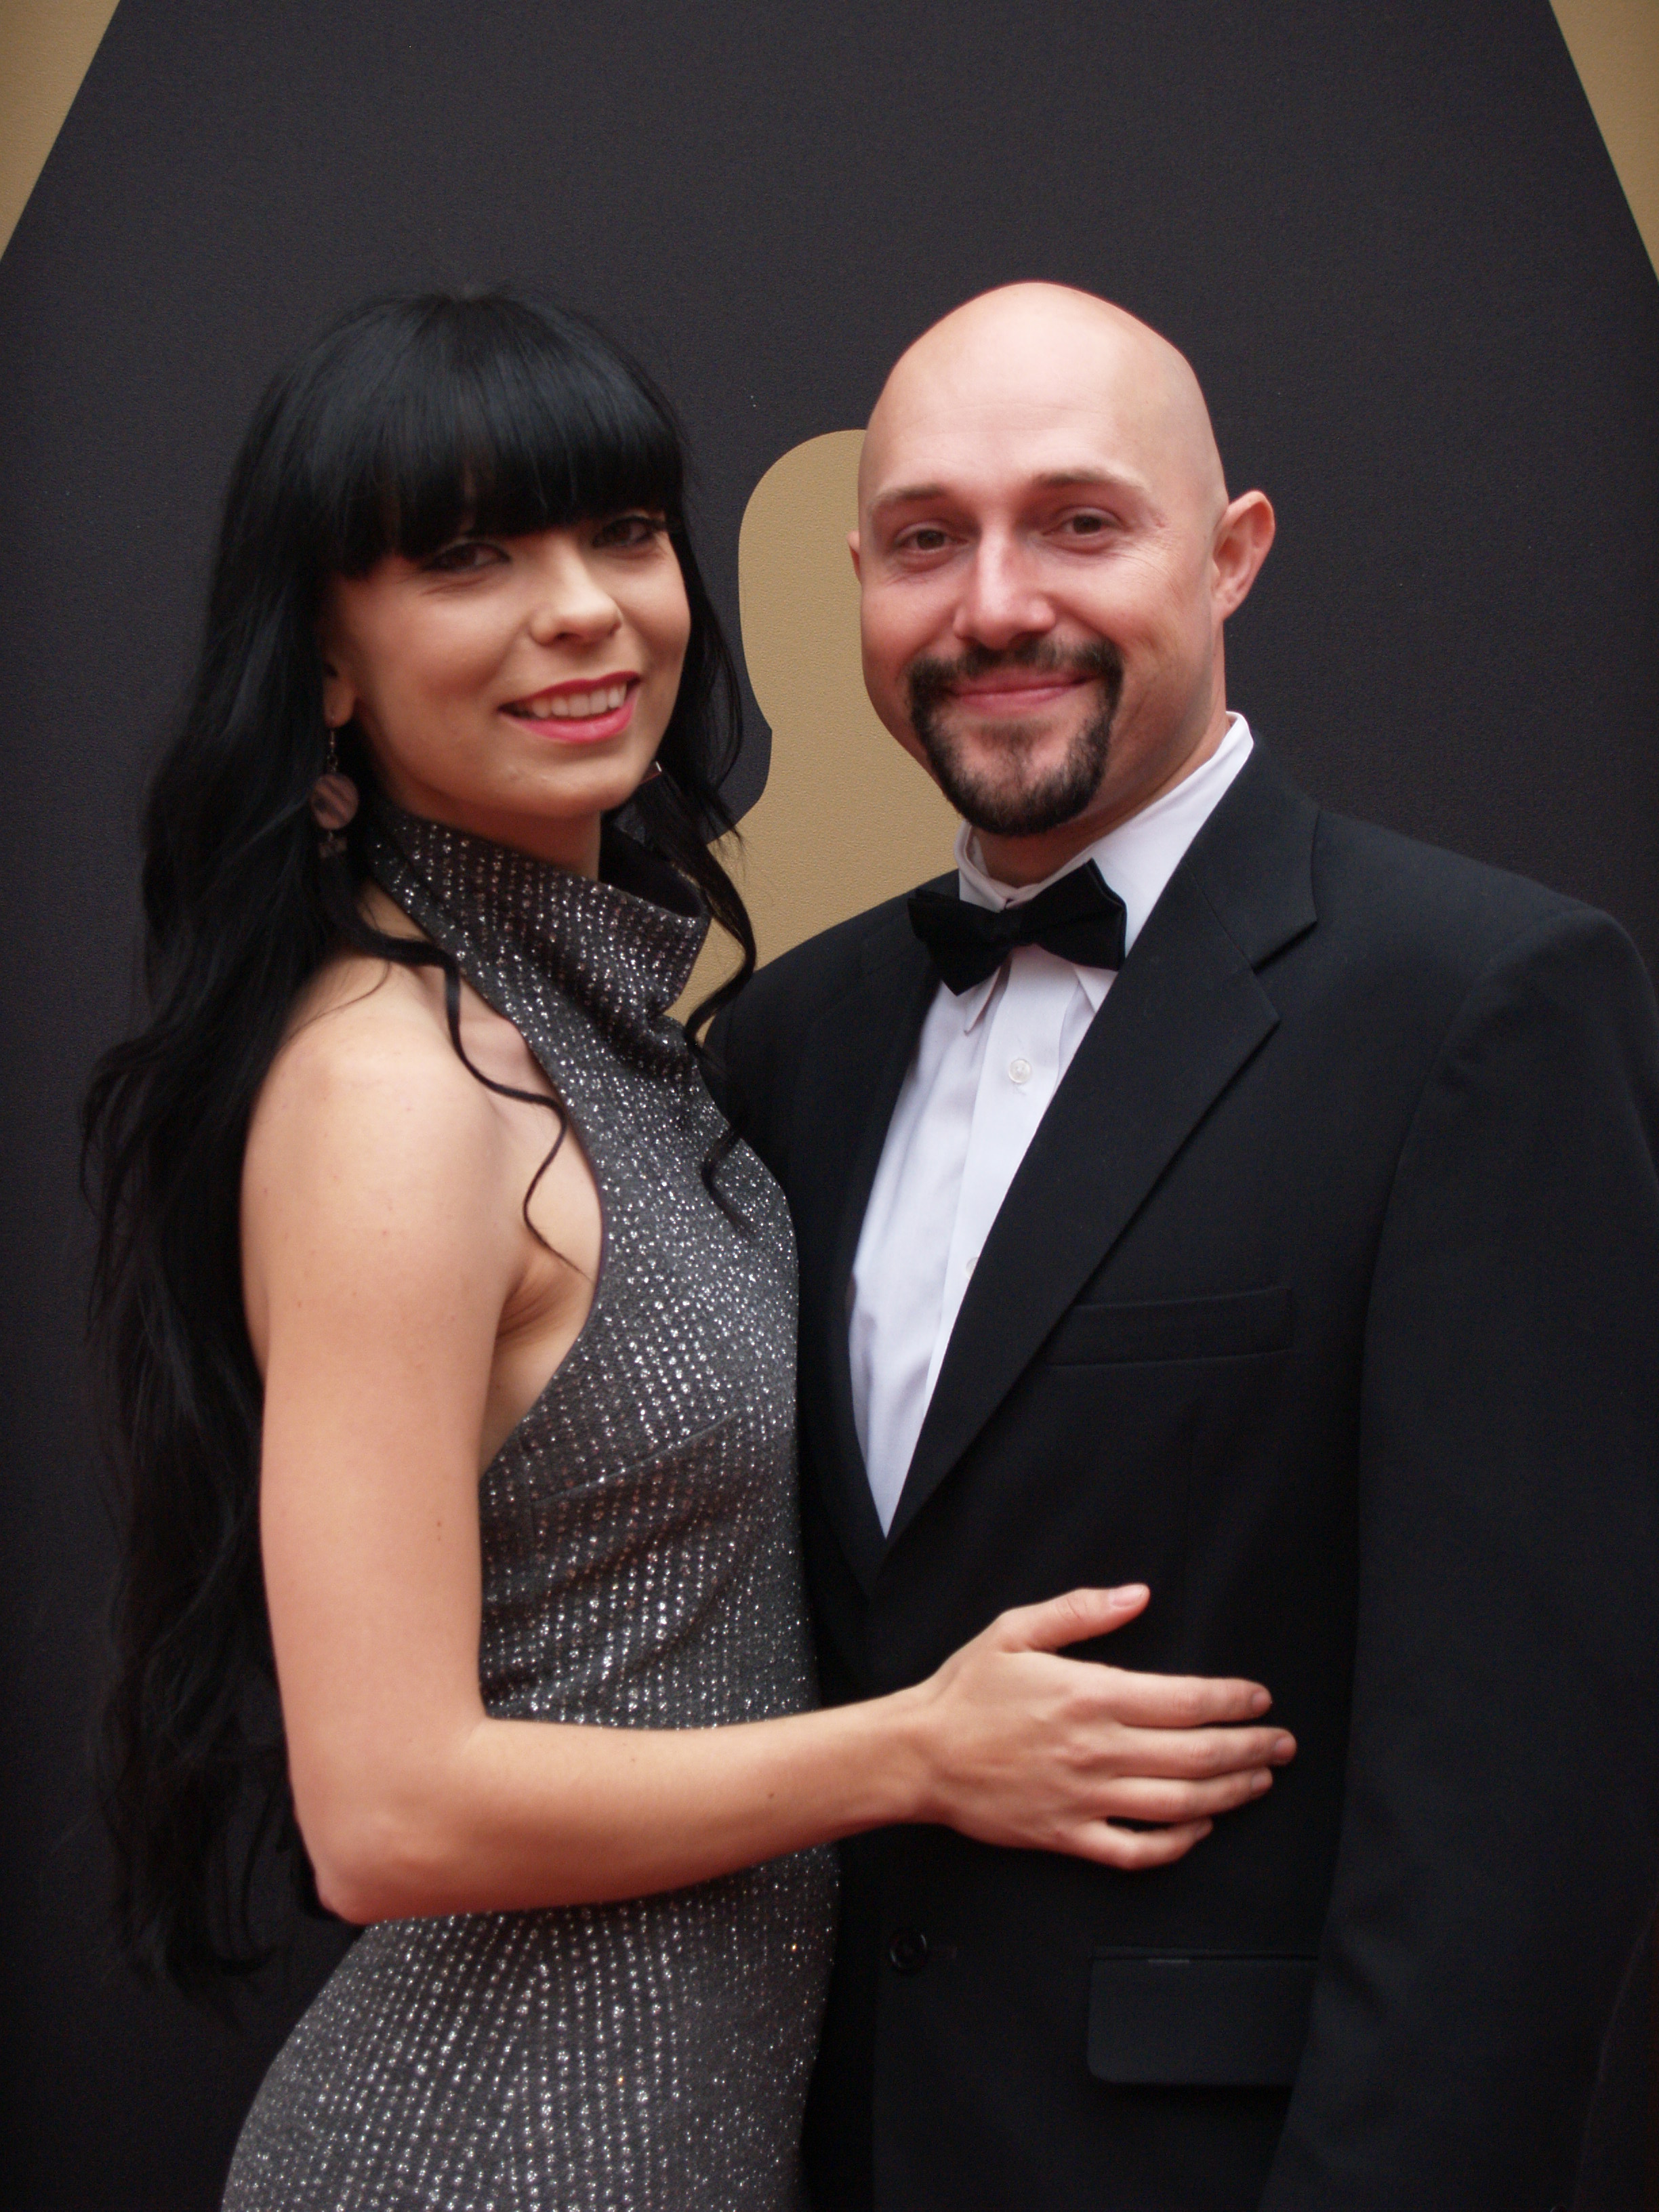 Director and actor Adam Sonnet with actress Elle Sonnet at the 87th Academy Awards (2014).